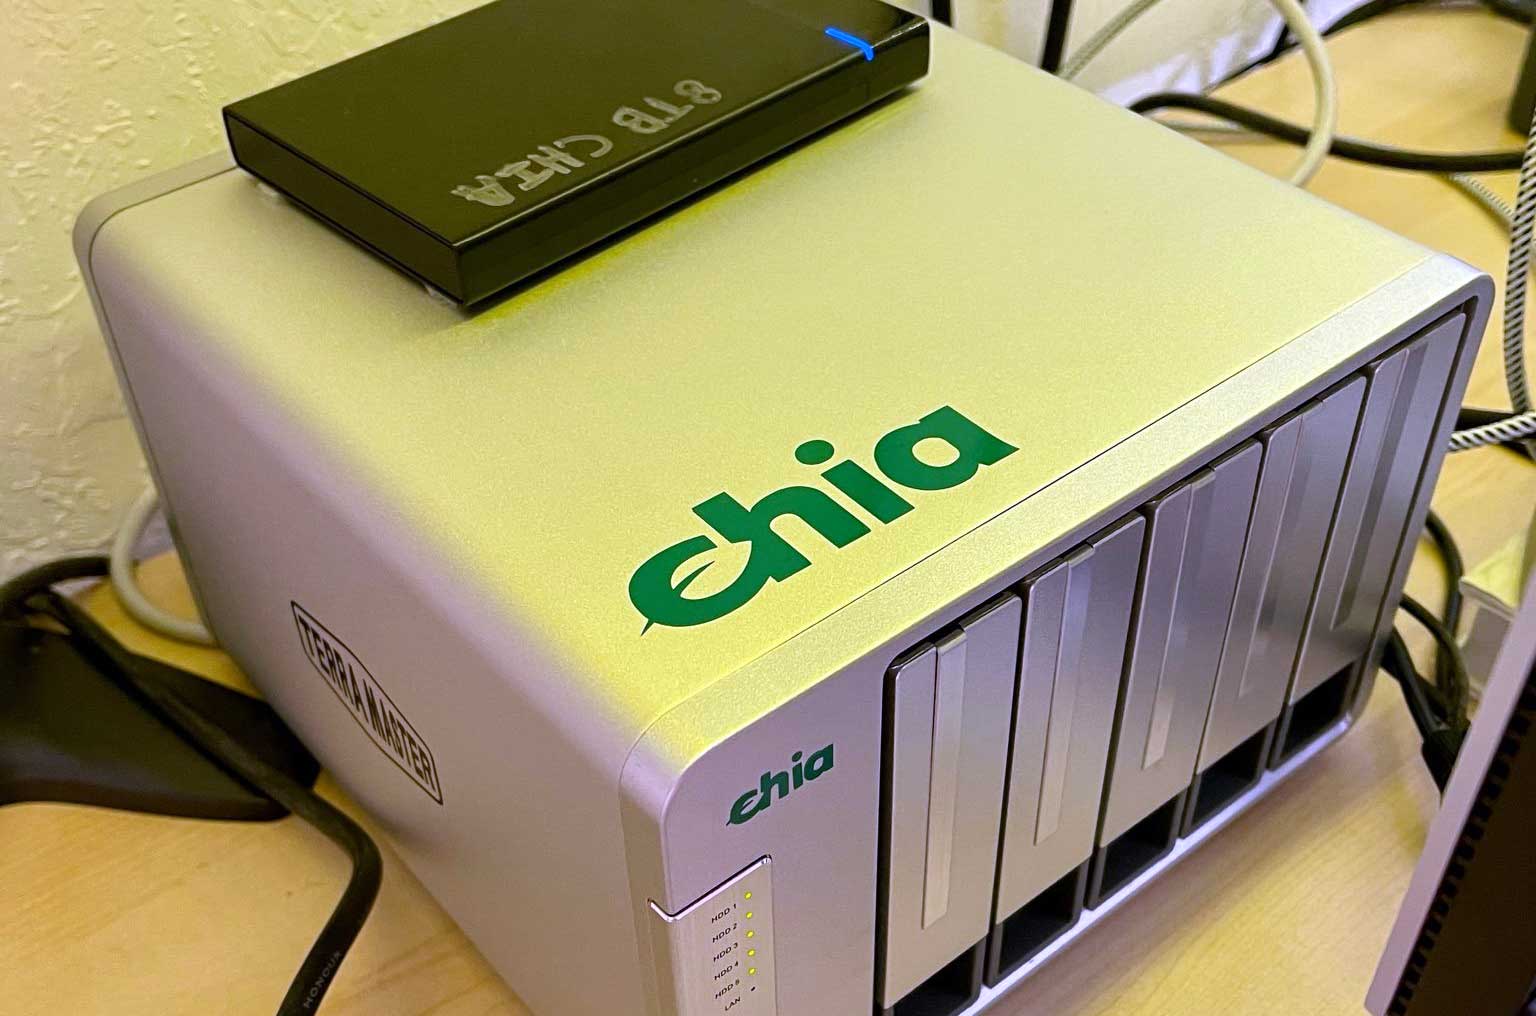 Chia miners selling off storage devices due to XCH bear market | bit-tech.net